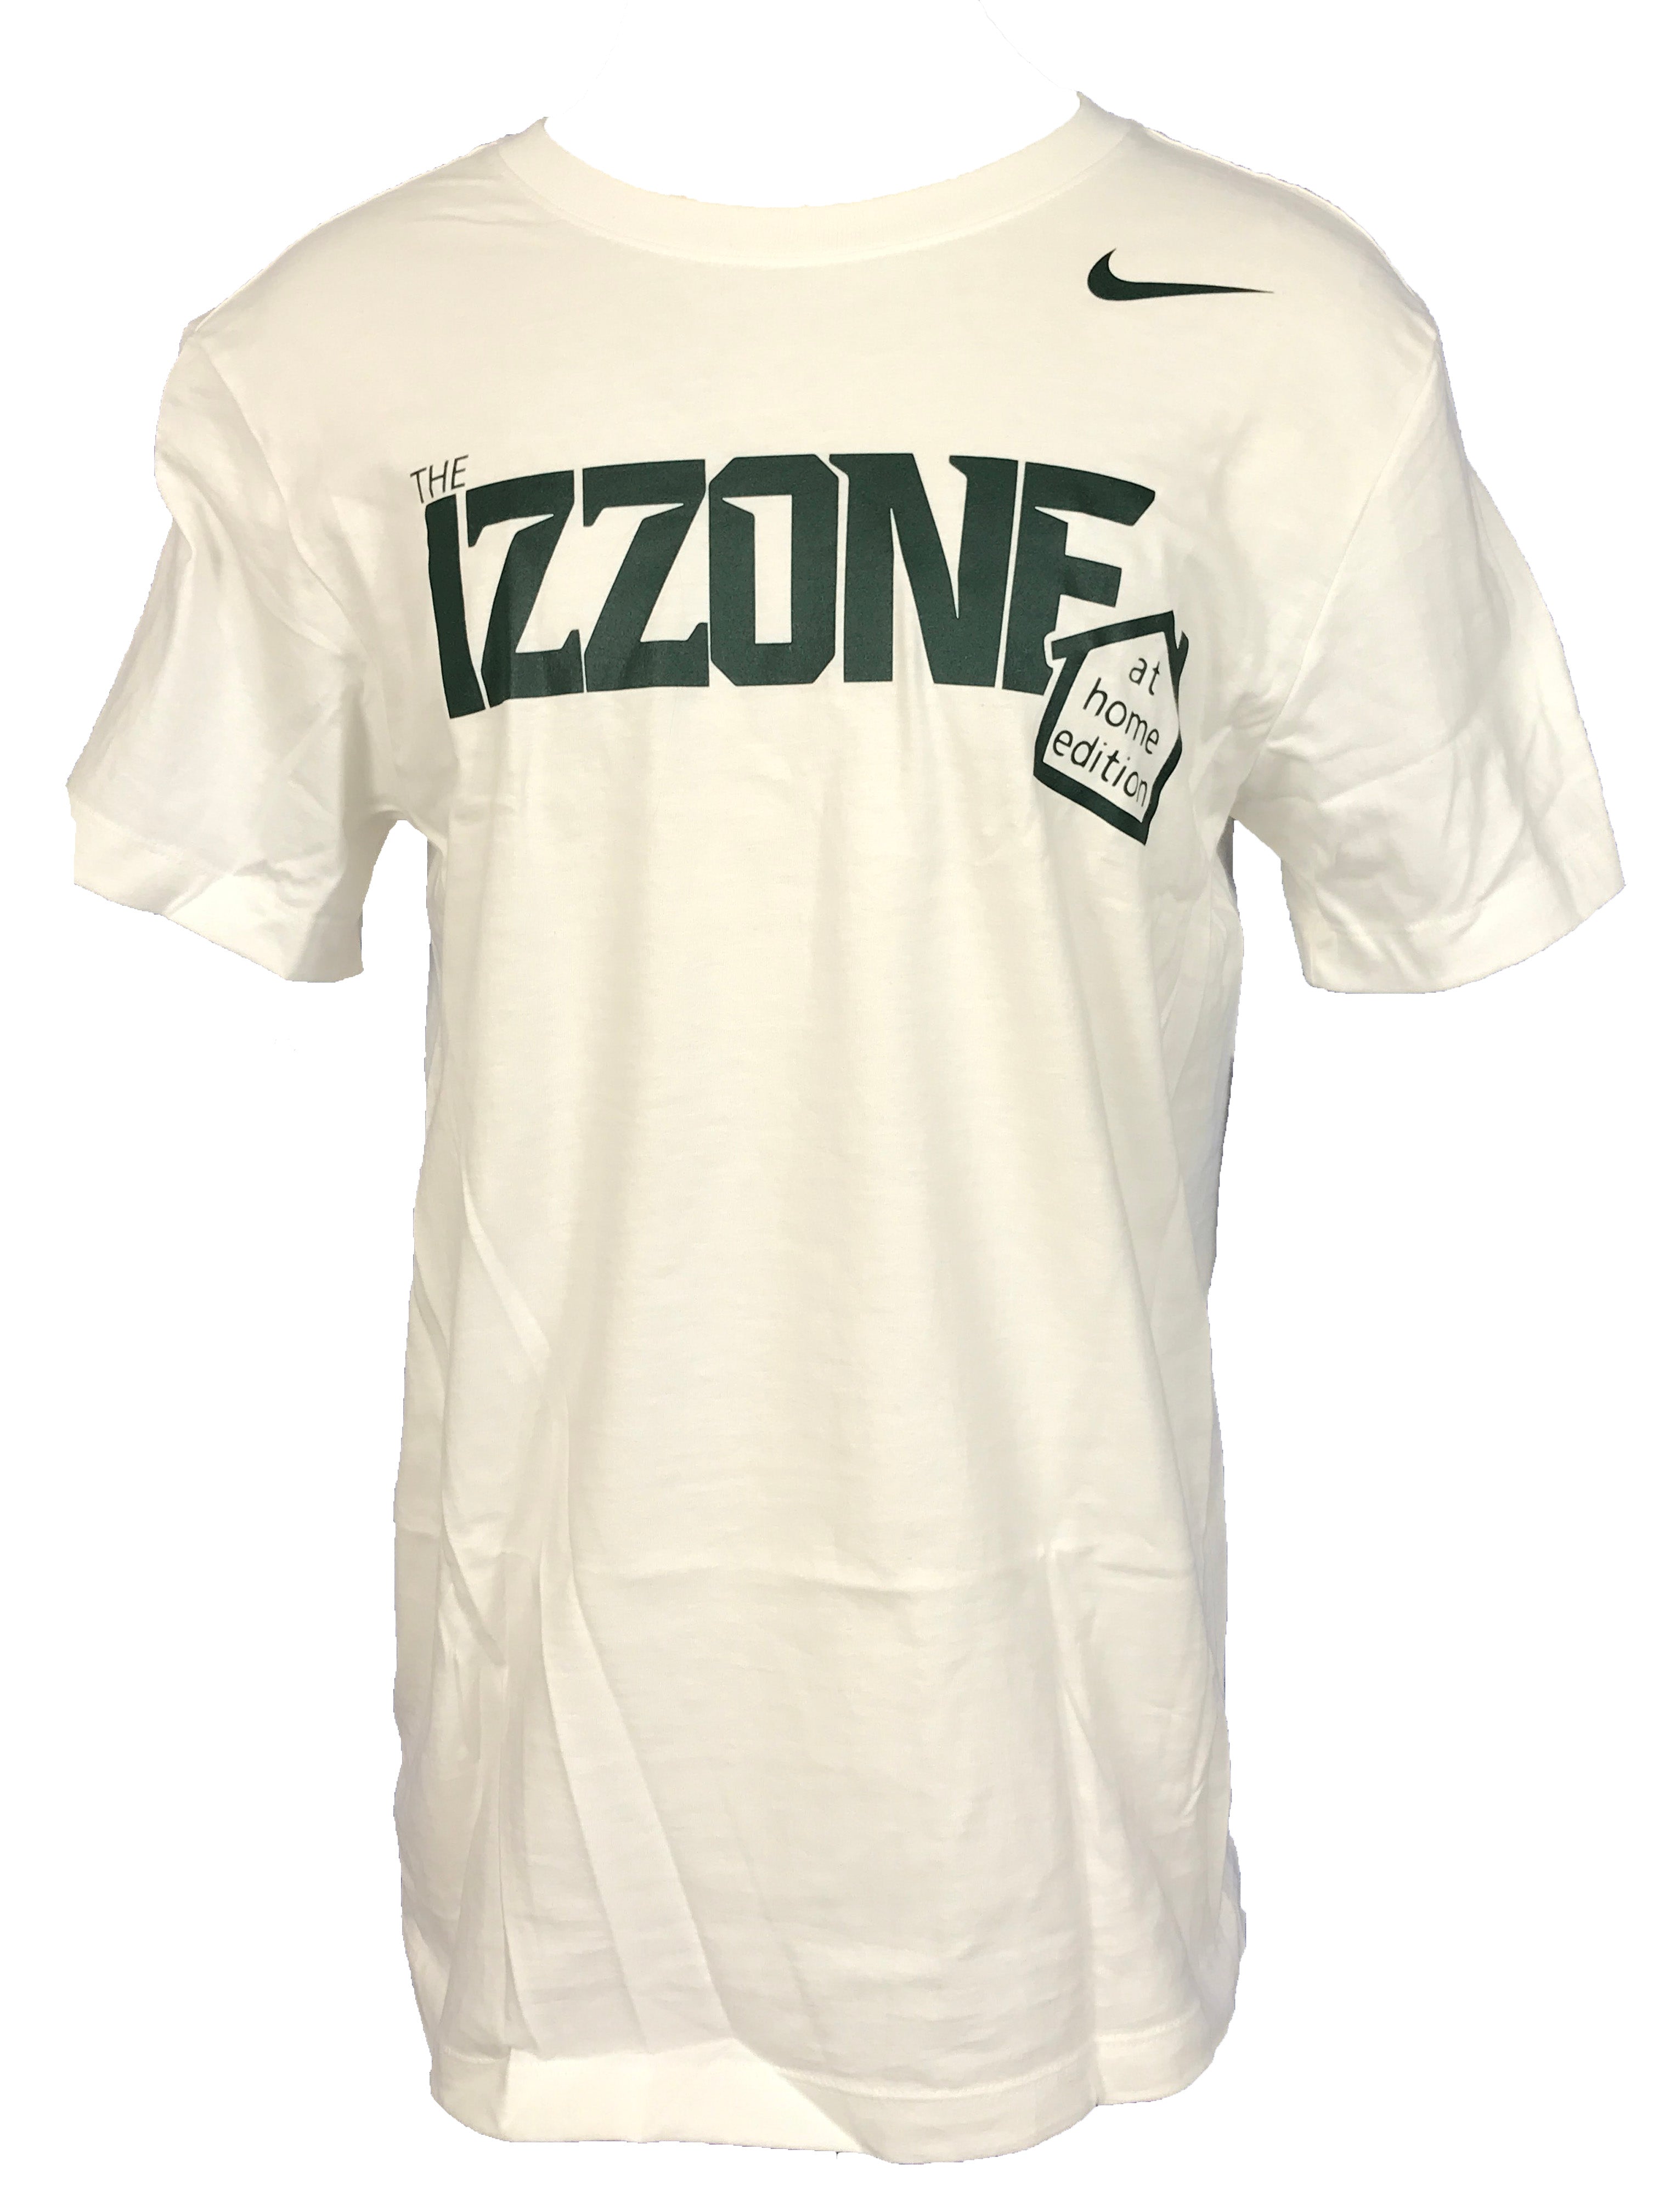 Nike White 2020 The Izzone At Home Edition MSU Basketball T-Shirt Men's Size XL